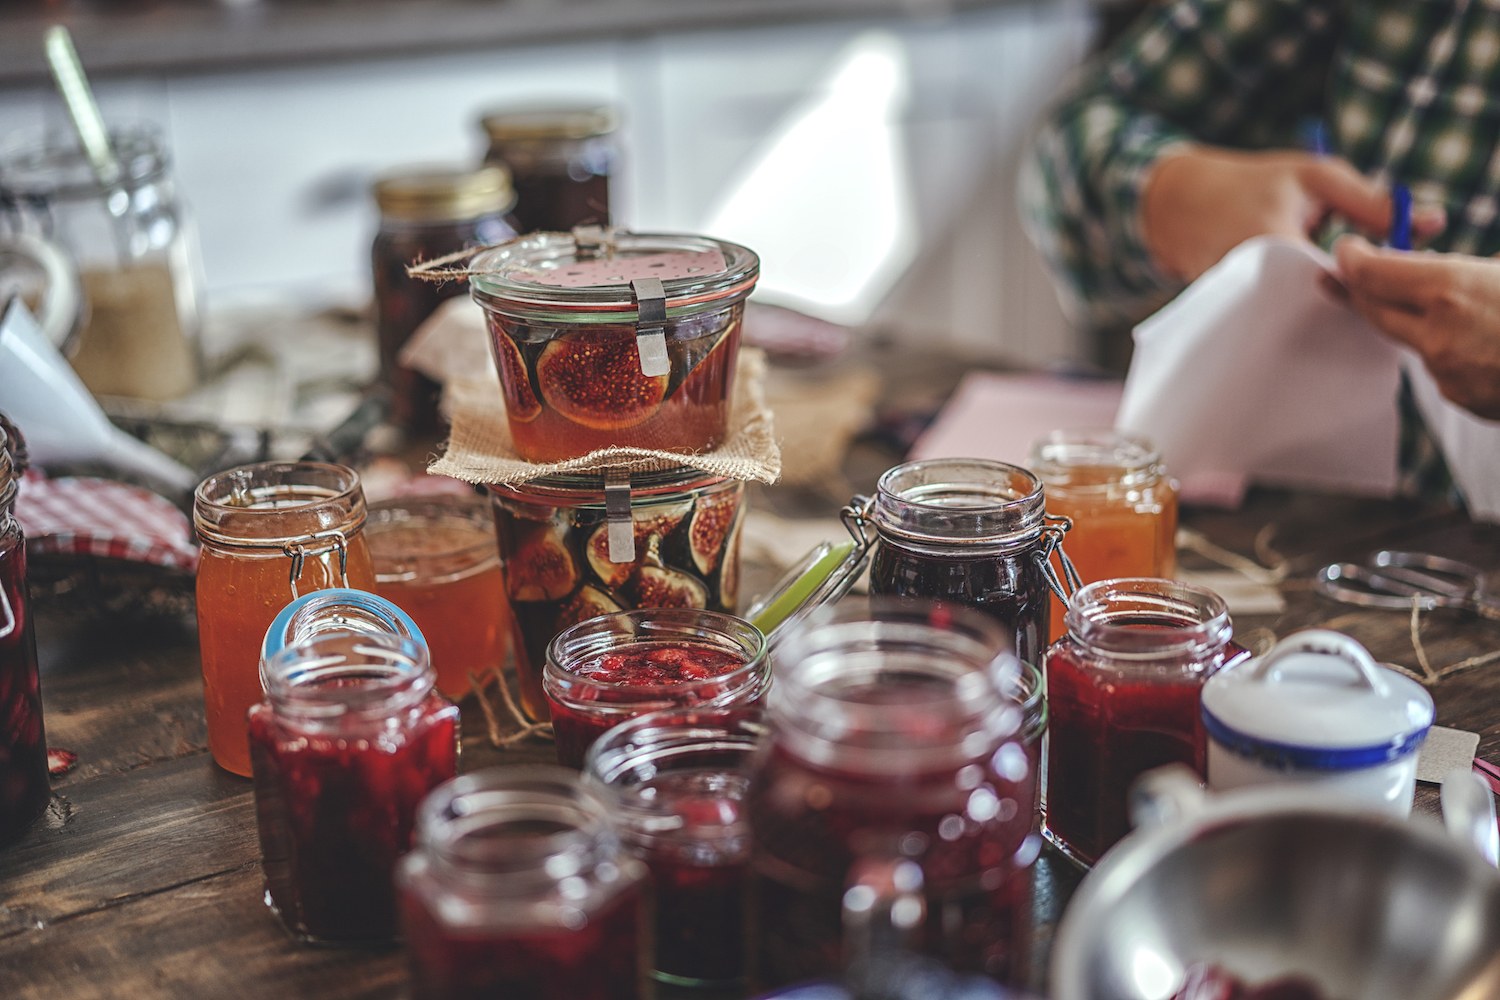 Preparing Homemade Strawberry, Blueberry and Raspberry Jam and Canning in Jars